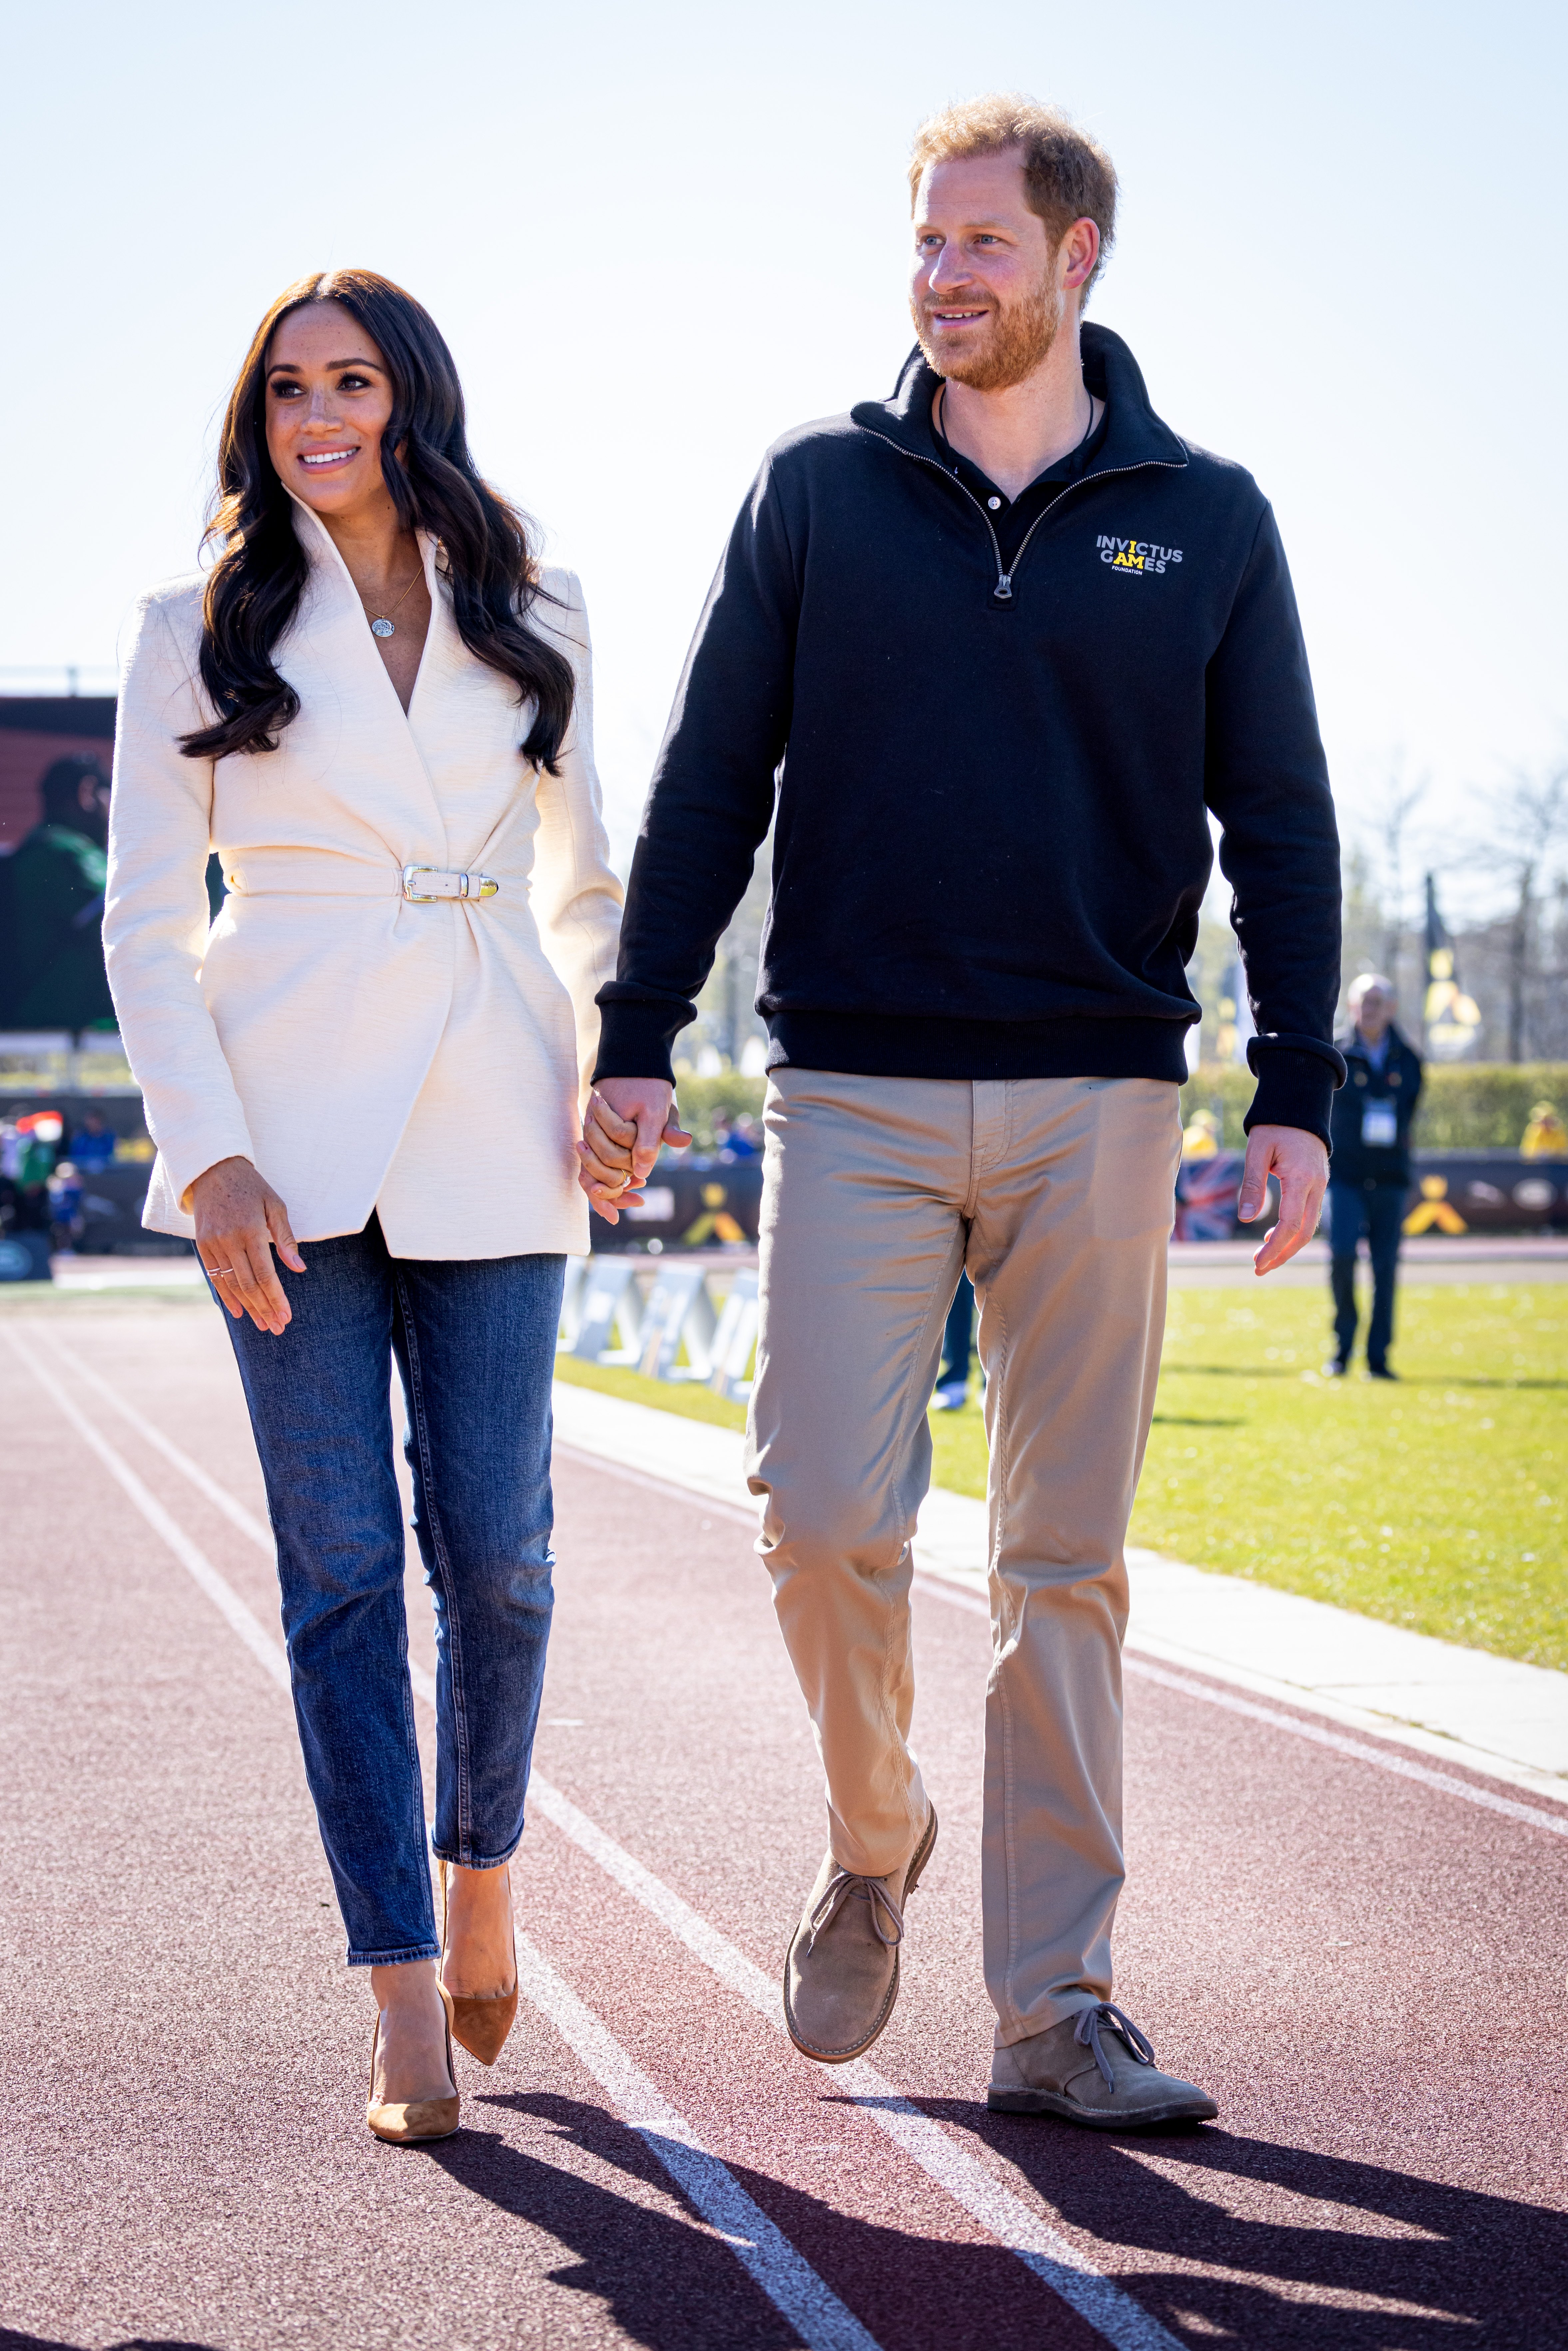 Meghan, Duchess of Sussex and Prince Harry, Duke of Sussex attend day two of the Invictus Games 2020 at Zuiderpark on April 17, 2022 in The Hague, Netherlands. | Source: Getty Images